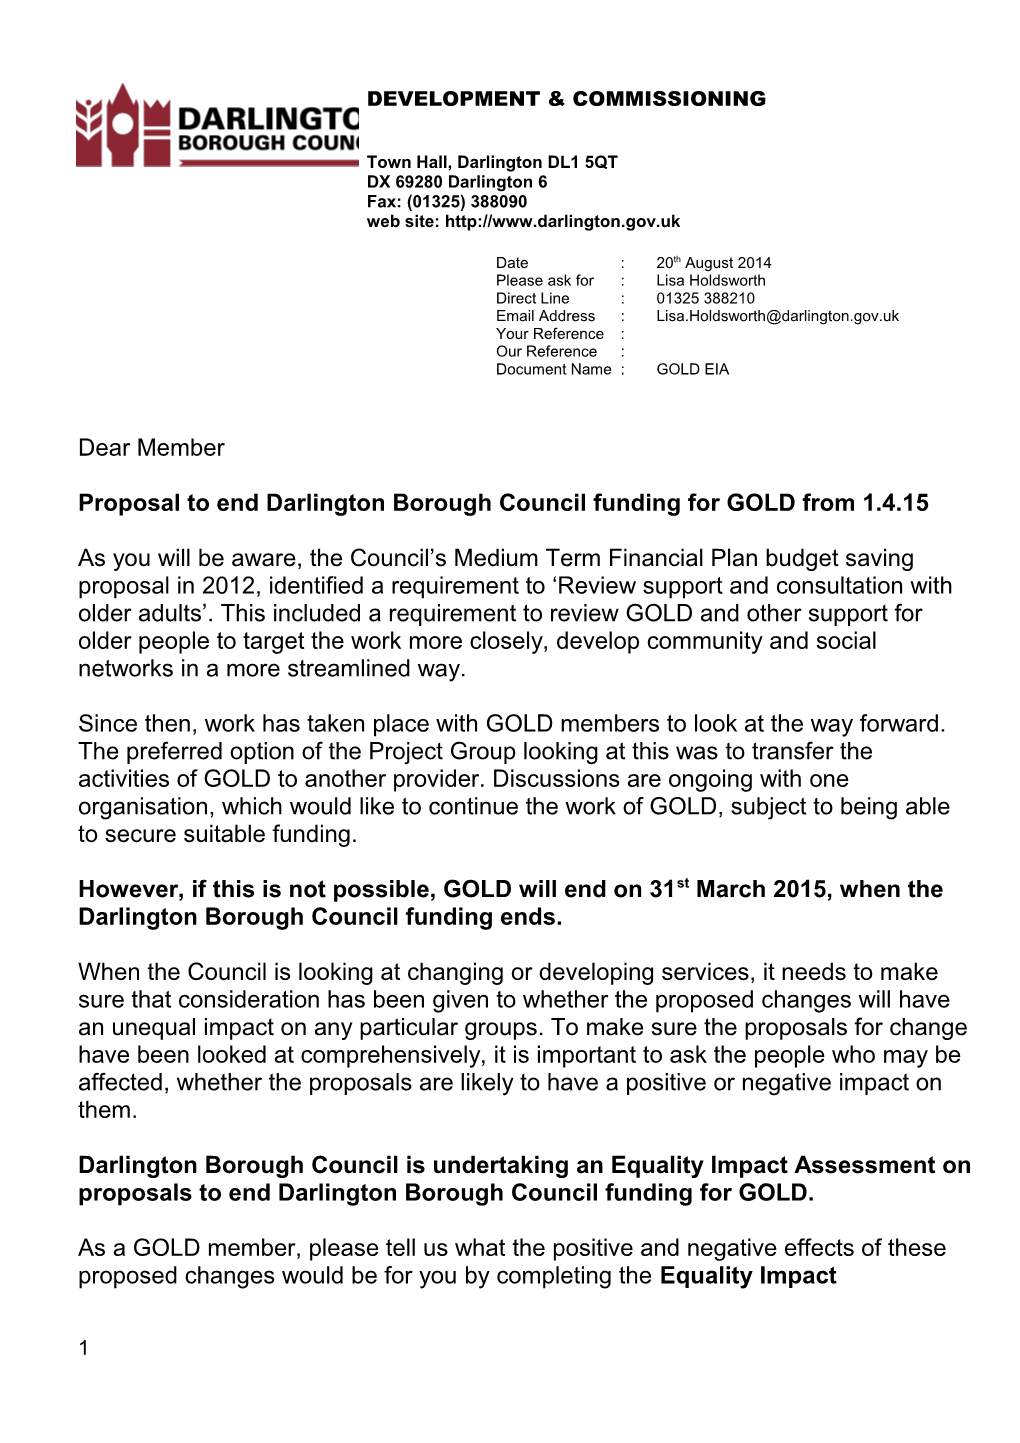 Proposal to End Darlington Borough Council Funding for GOLD from 1.4.15